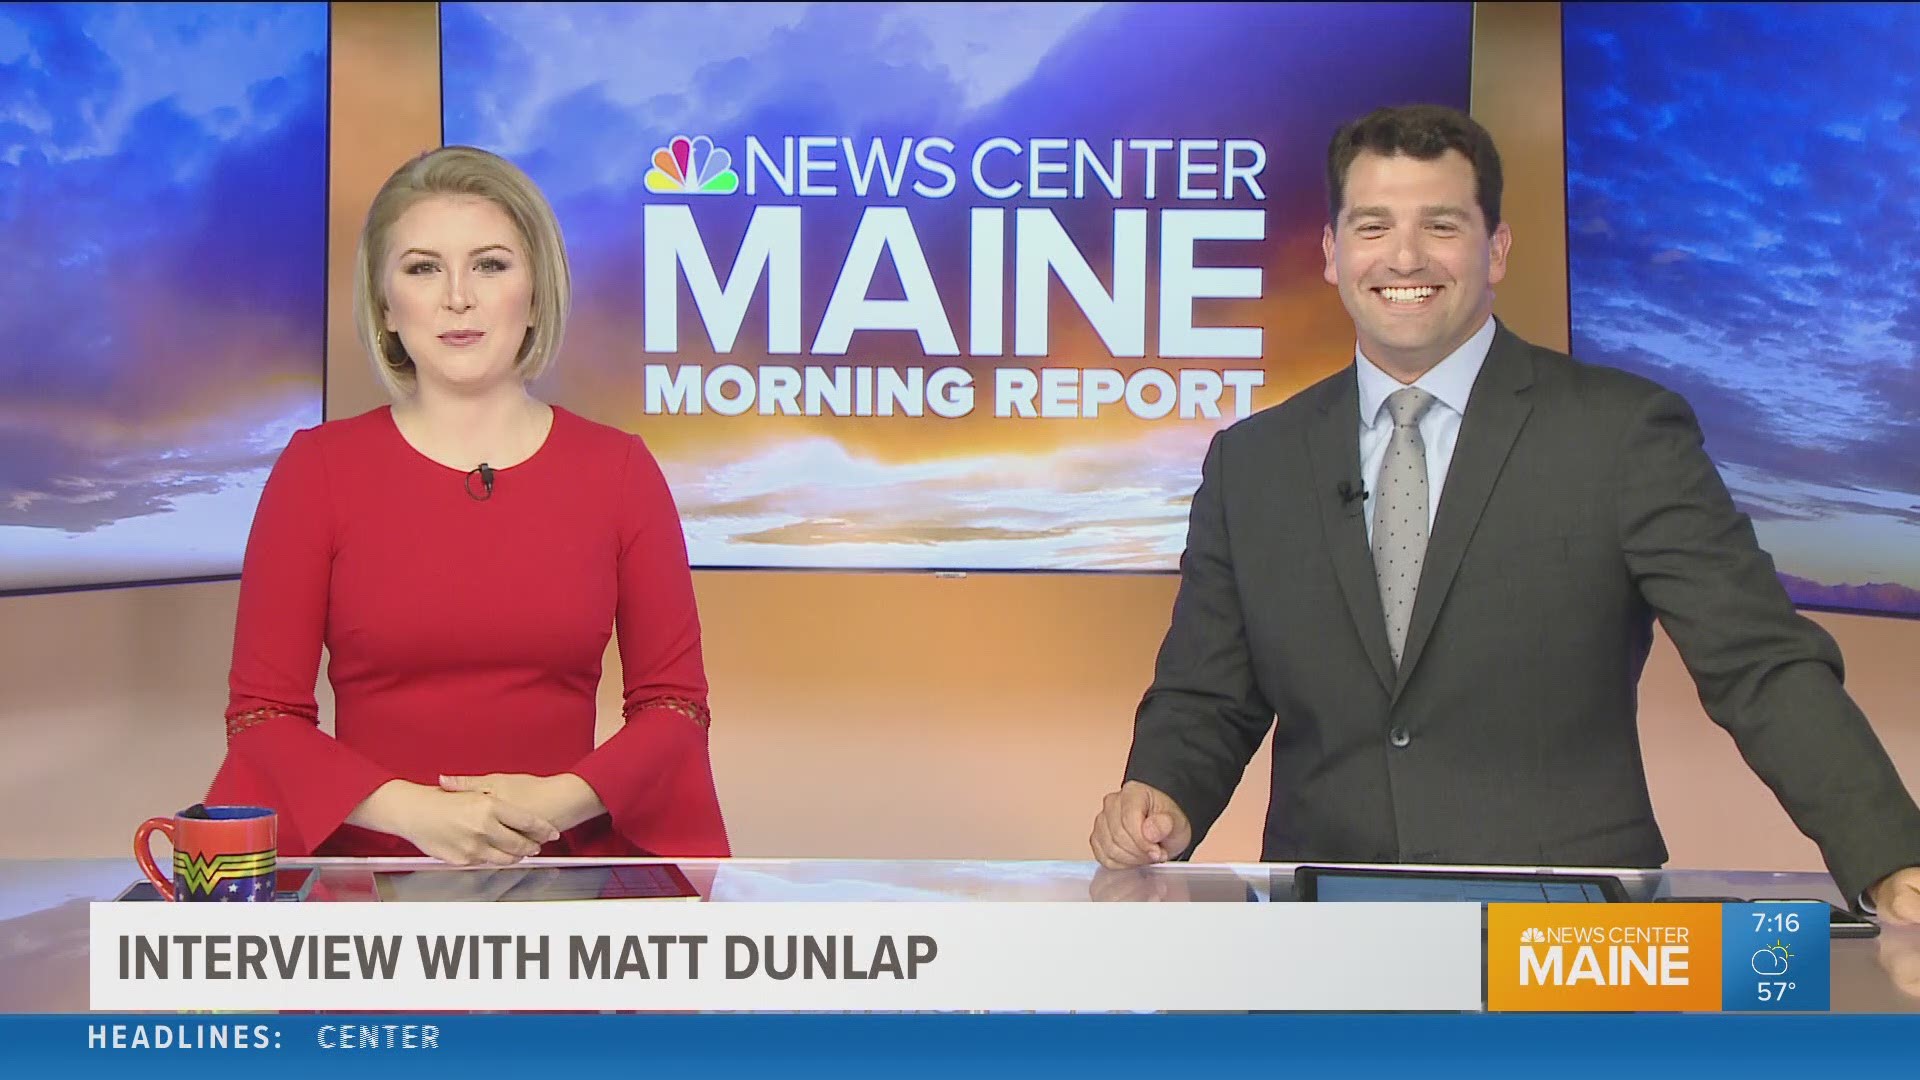 Maine's Secretary of State joins the Weekend Morning Report on the phone to discuss the process, lessons-learned and taxpayer savings.